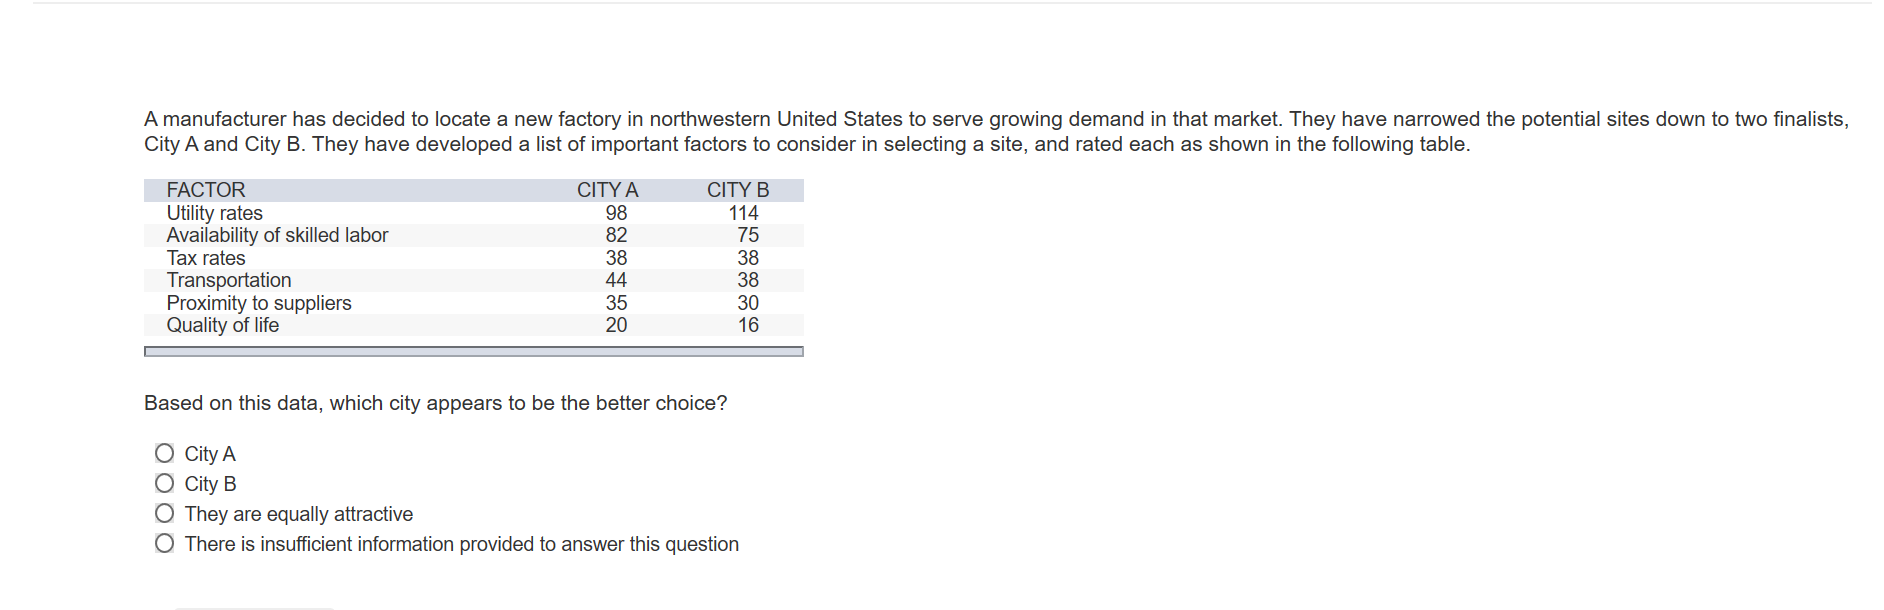 A manufacturer has decided to locate a new factory in northwestern United States to serve growing demand in that market. They have narrowed the potential sites down to two finalists,
City A and City B. They have developed a list of important factors to consider in selecting a site, and rated each as shown in the following table.
CITY B
114
75
FACTOR
CITY A
Utility rates
Availability of skilled labor
Tax rates
Transportation
Proximity to suppliers
Quality of life
98
82
38
44
38
38
35
20
16
Based on this data, which city appears to be the better choice?
O City A
O City B
O They are equally attractive
O There is insufficient information provided to answer this question
